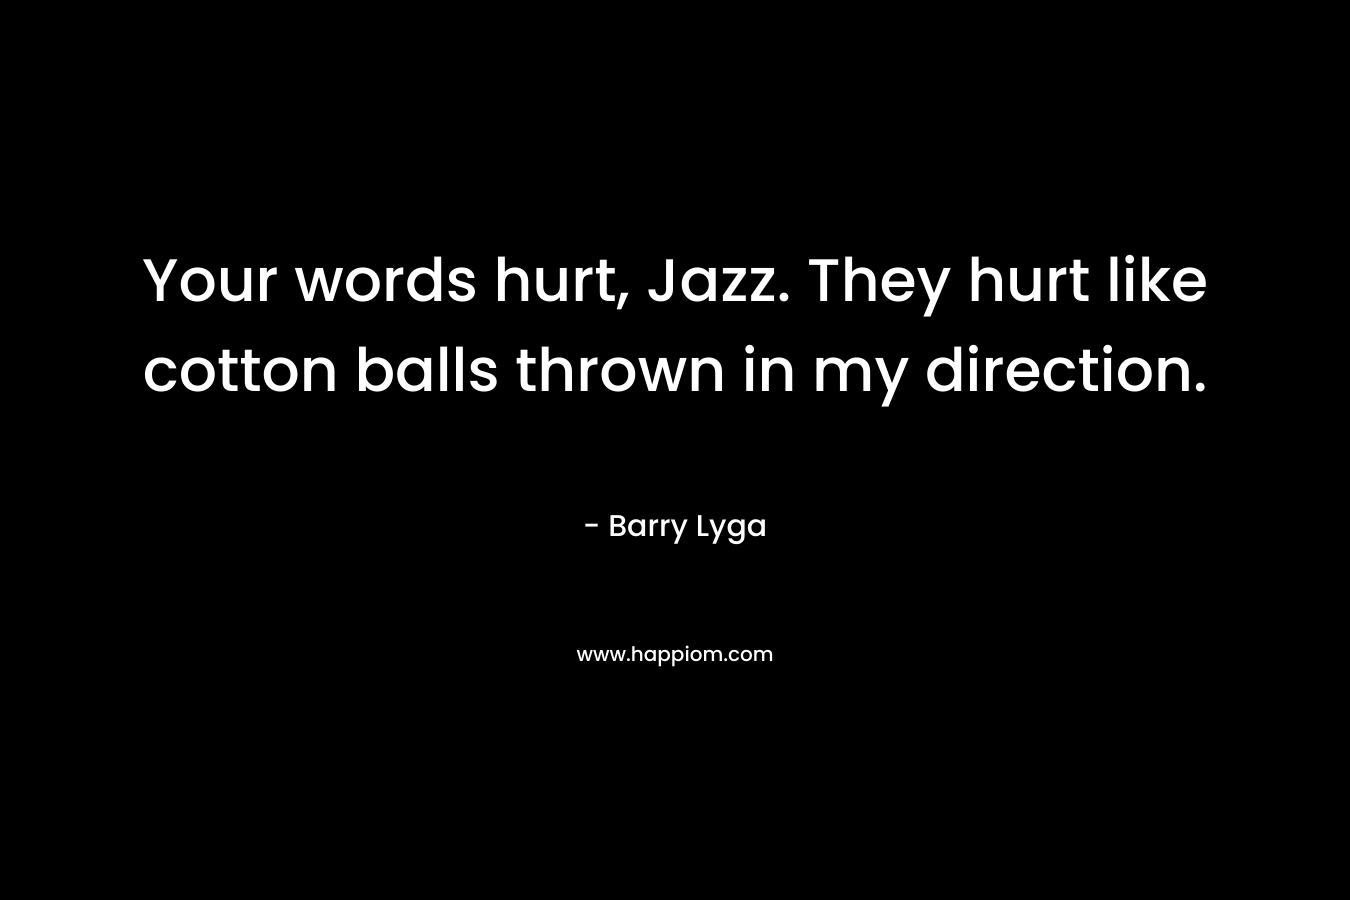 Your words hurt, Jazz. They hurt like cotton balls thrown in my direction. – Barry Lyga